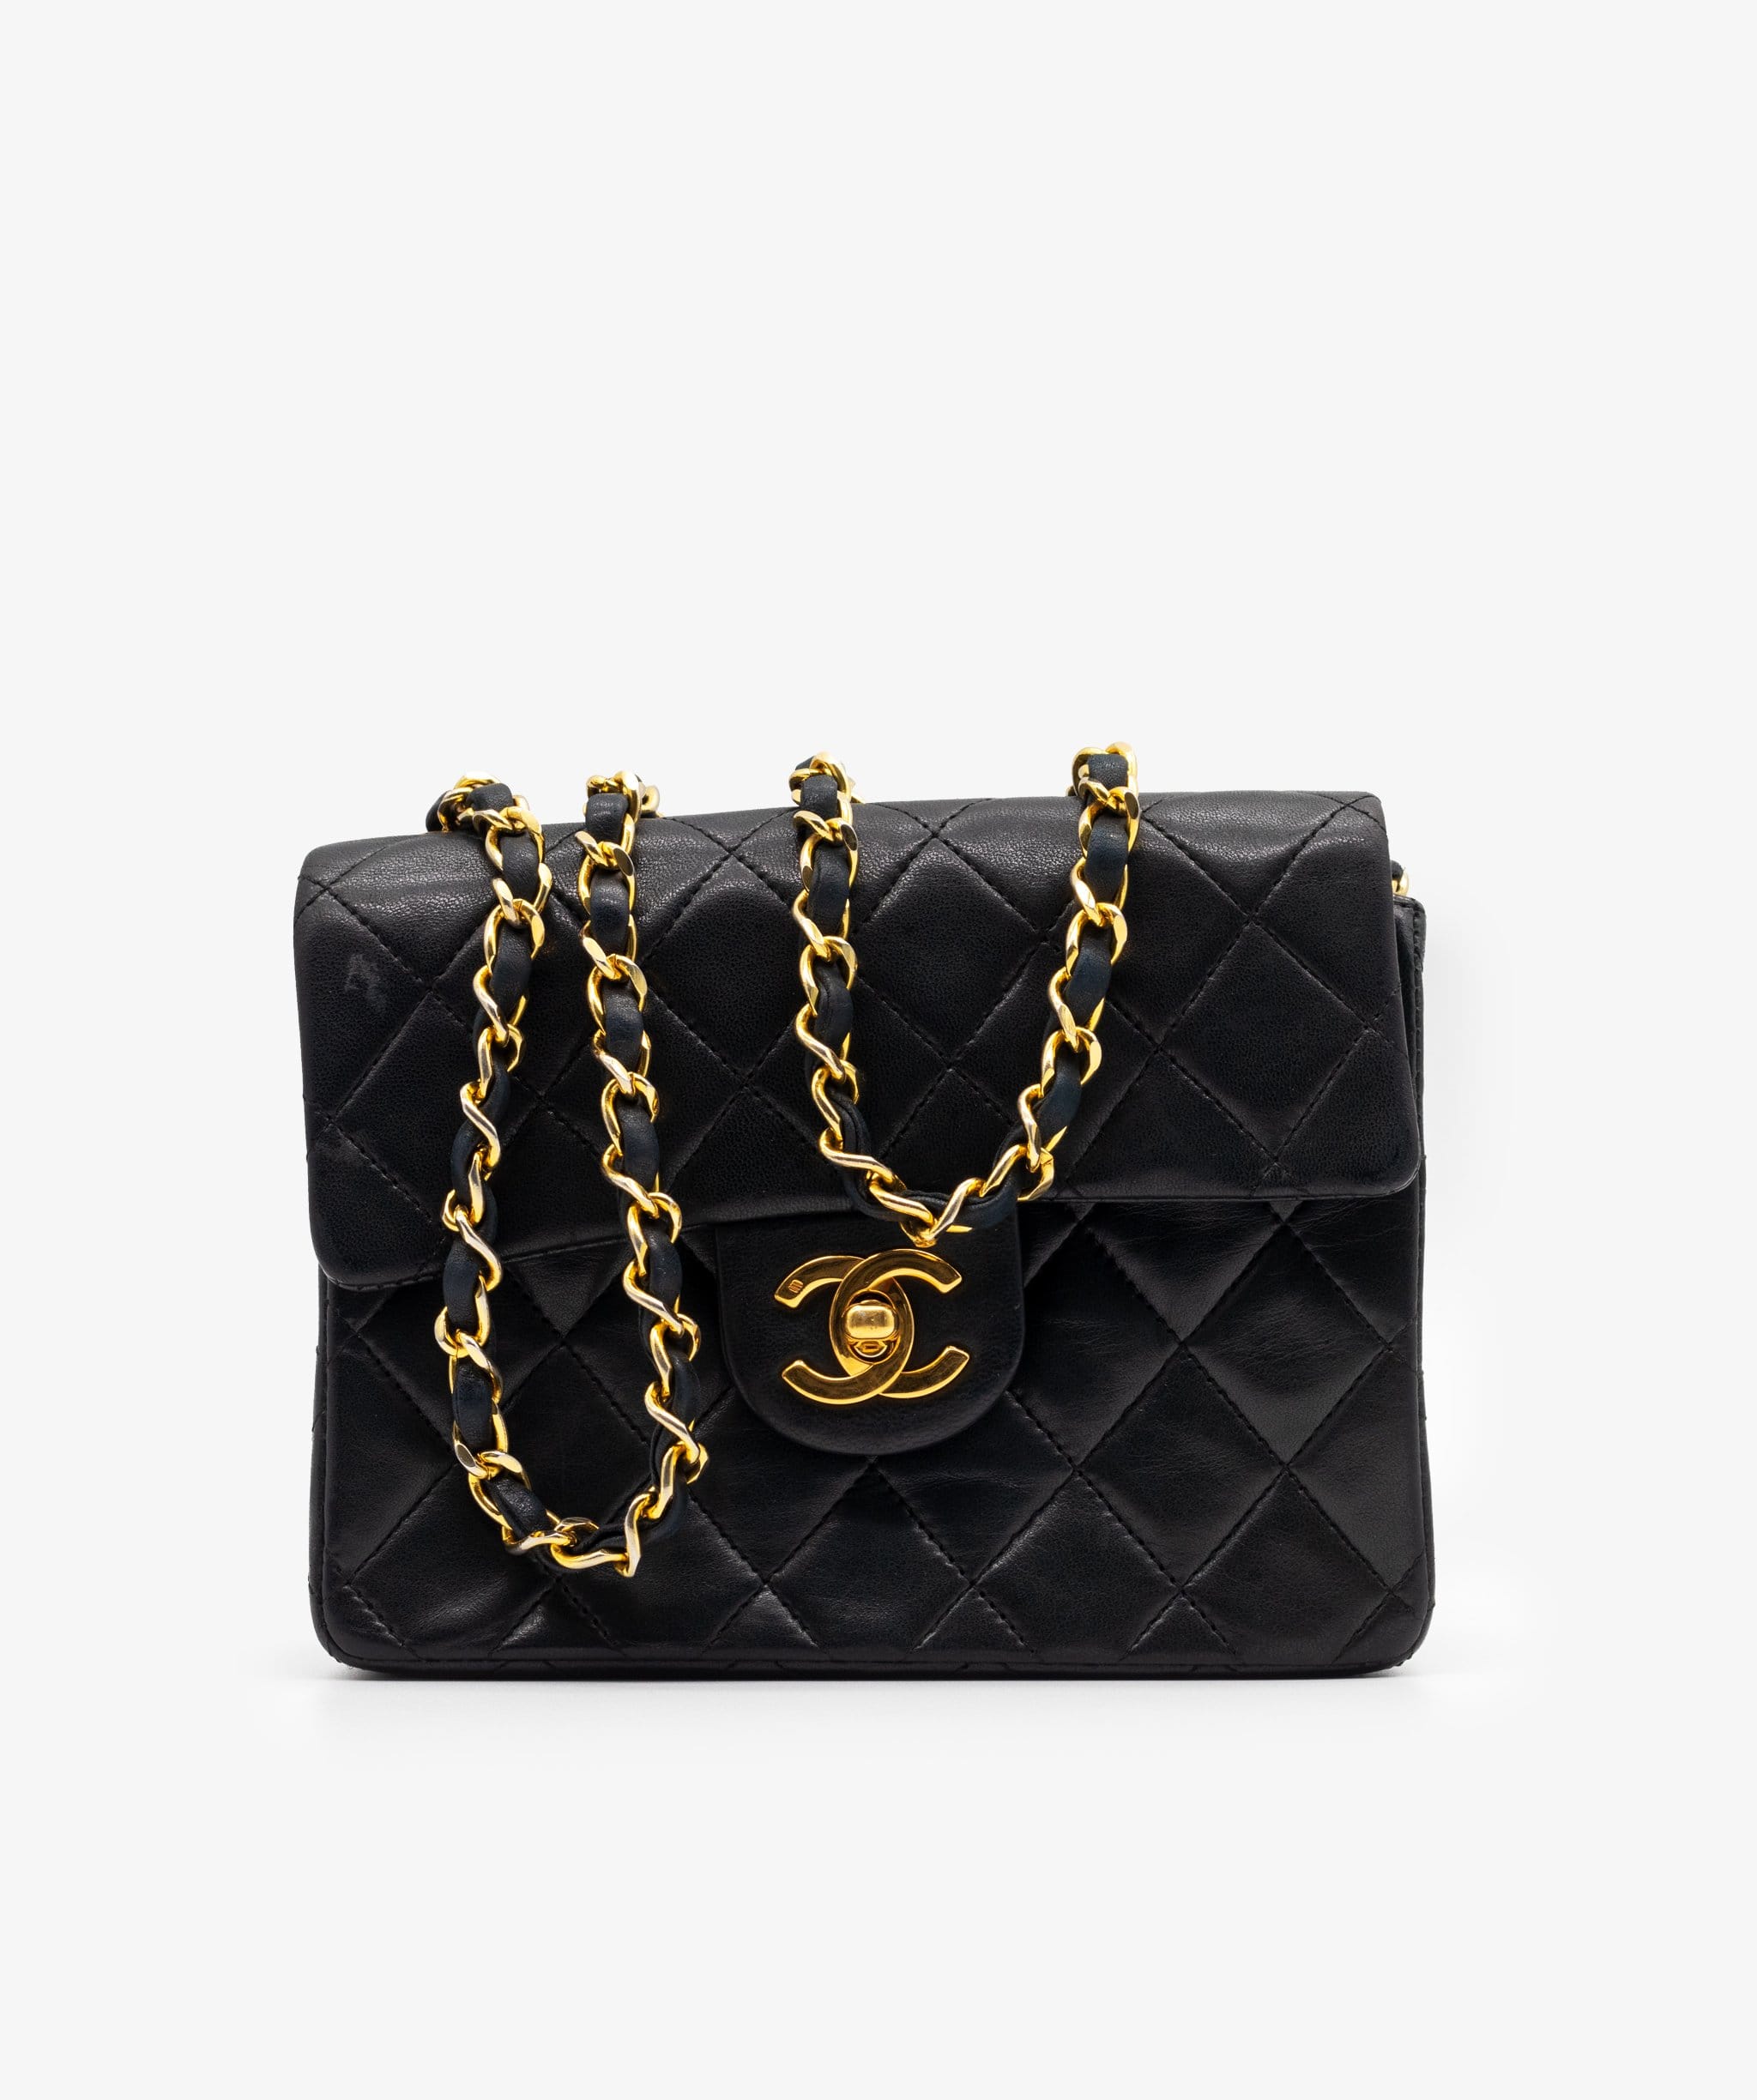 The Global Luxury Closet - Chanel 21S Black Caviar GHW Top handle Mini  rectangular flap bag in boutique fresh condition full box set with receipt  £3825 + shipping fee $5299 + shipping